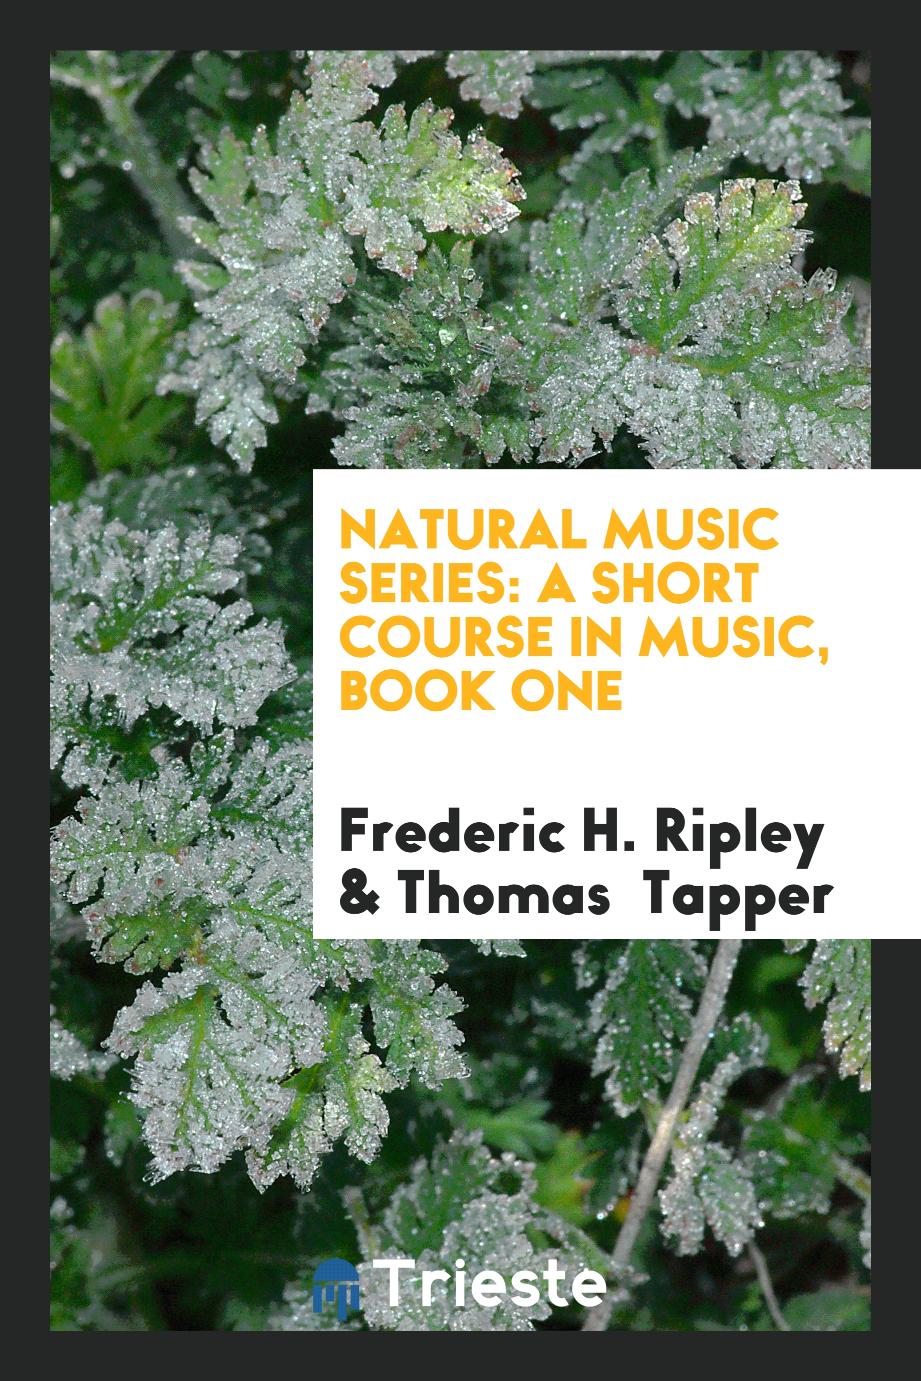 Natural Music Series: A Short Course in Music, Book One